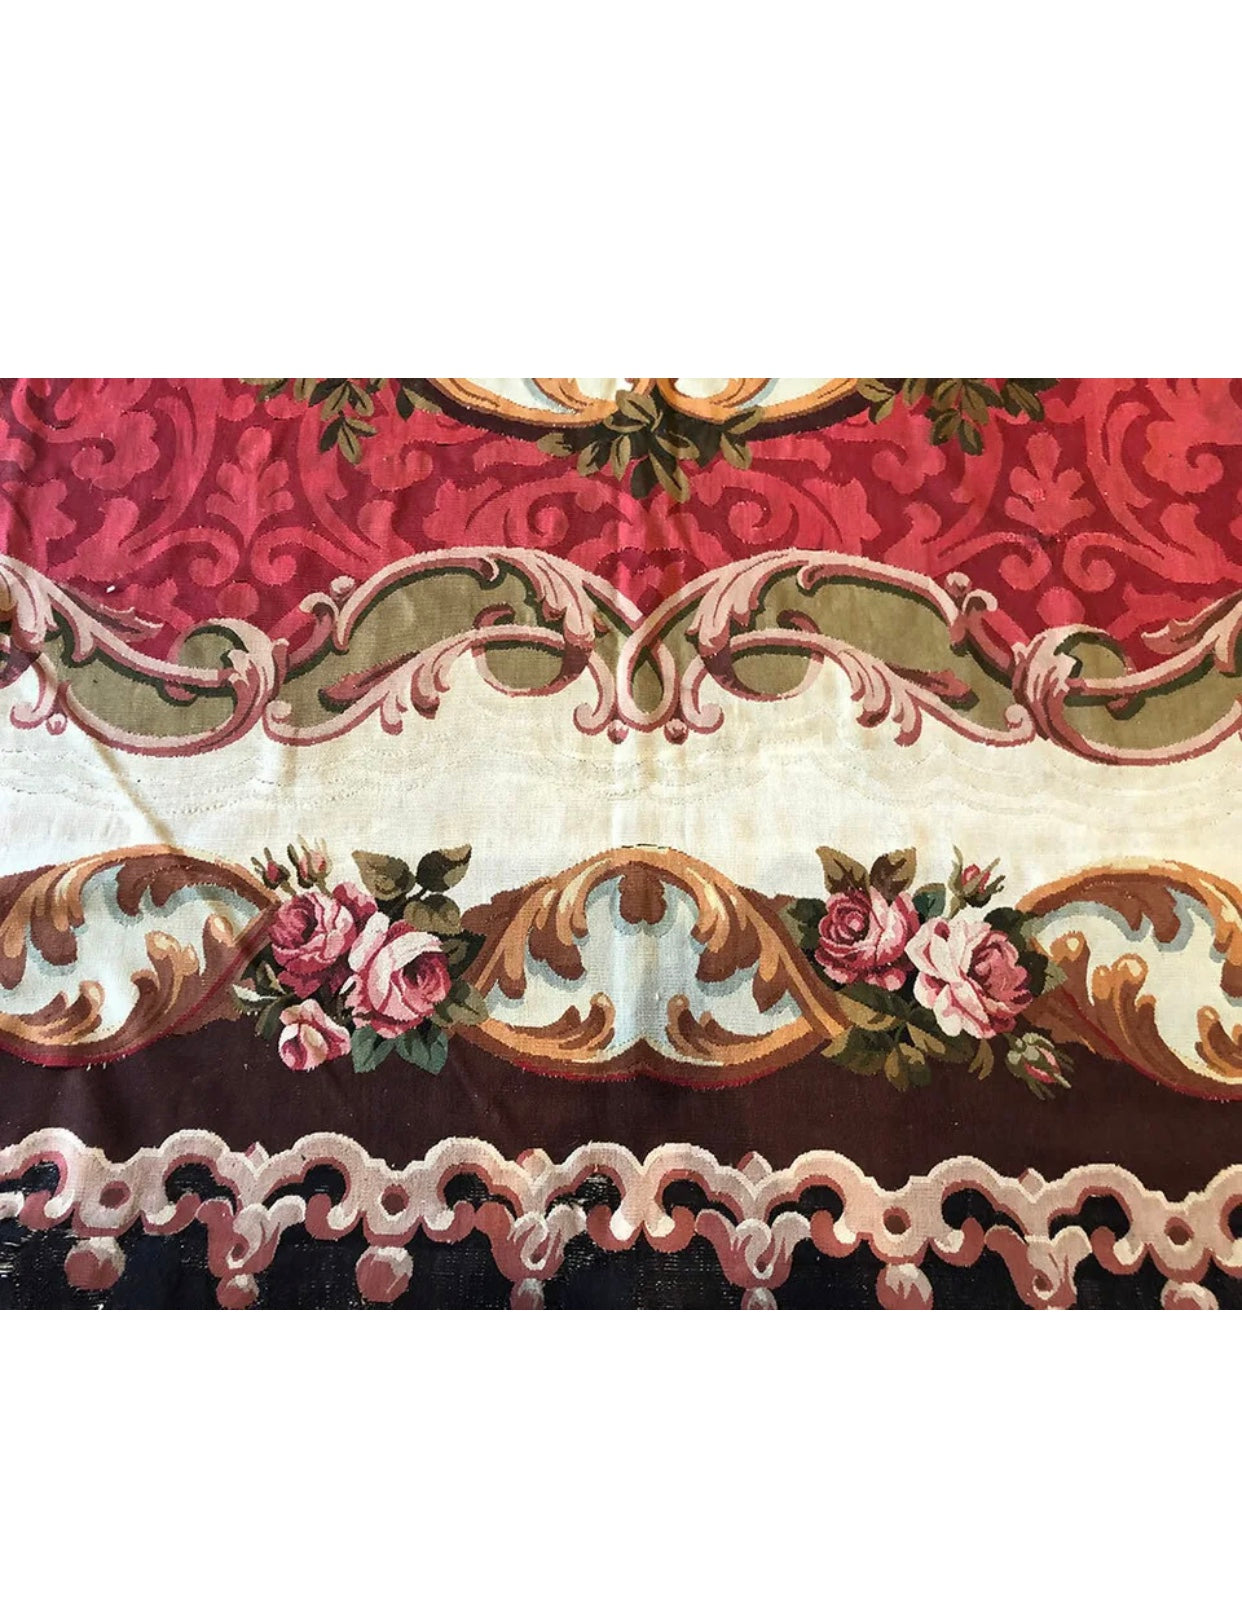 A 19th Century Palatial Size French Aubusson Flat Weave Rug